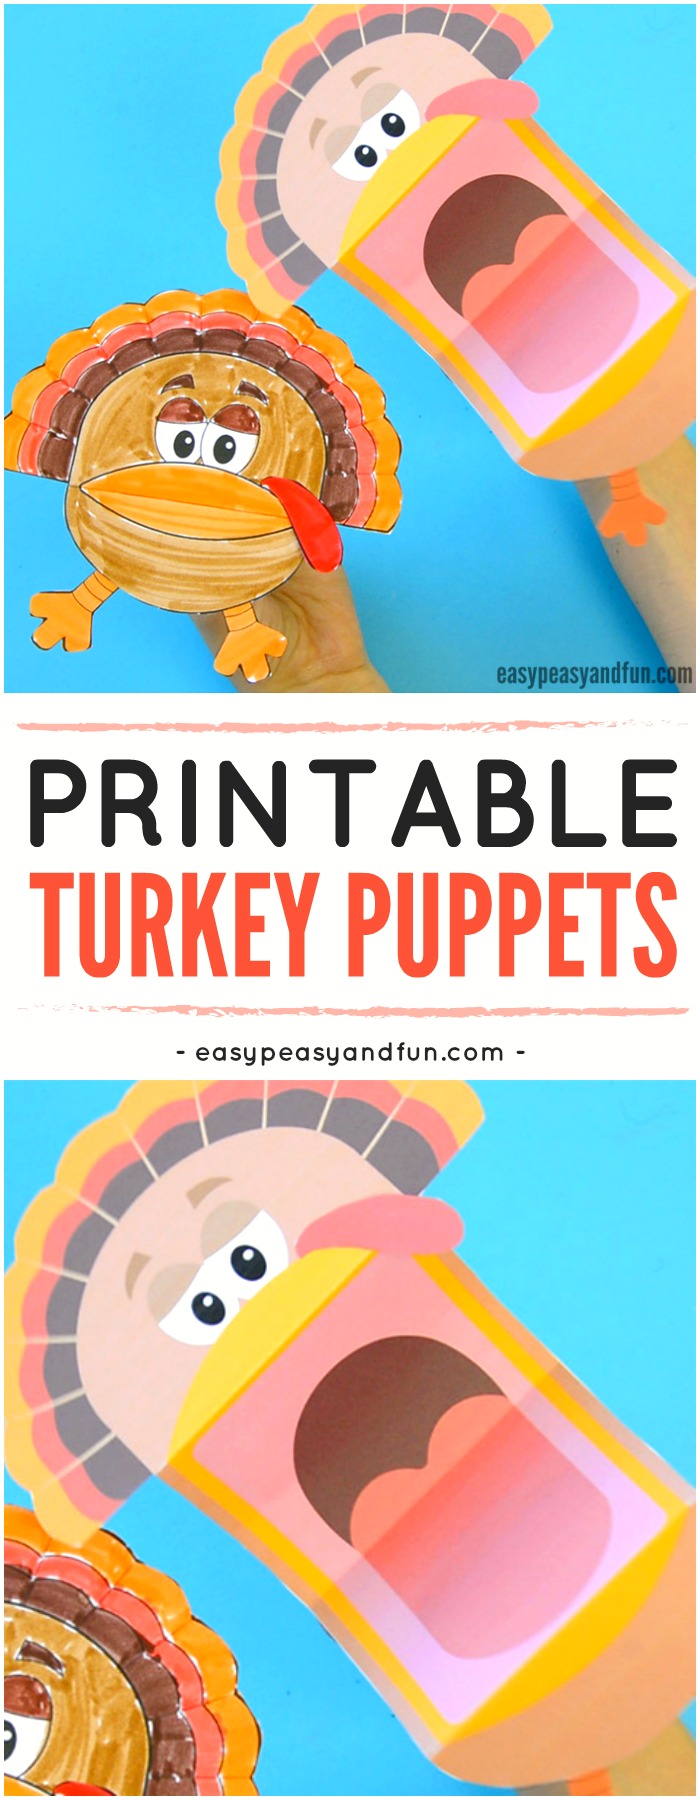 Printable Turkey Puppets Craft for Kids. Super Fun Thanksgiving and Fall Activity for Kids. #Craftforkids #Thanksgivingcraftforkids #Printablepuppets